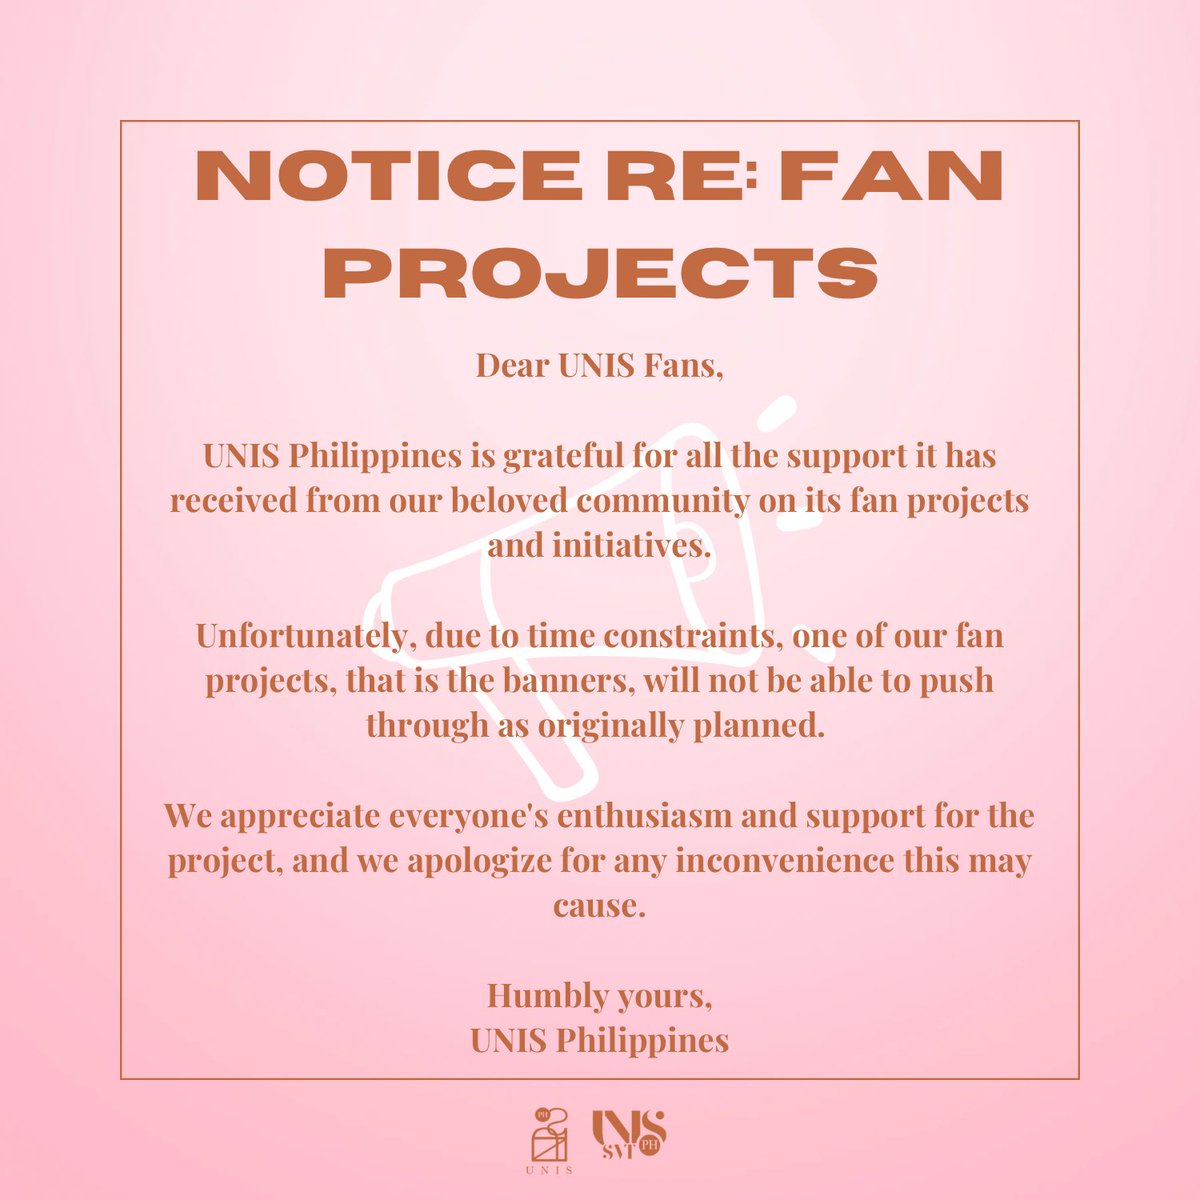 240405 [📣]

𝐒𝐓𝐀𝐓𝐄𝐌𝐄𝐍𝐓 𝐑𝐄𝐆𝐀𝐑𝐃𝐈𝐍𝐆 𝐔𝐍𝐈𝐒𝐏𝐇 𝐅𝐒𝐄 𝐇𝐀𝐍𝐃 𝐁𝐀𝐍𝐍𝐄𝐑𝐒

Due to late approval, the banners didn't make it to the production period. Please read the full statement below.

Thank you so much for your understanding!💓

#WE_UNIS #SUPERWOMAN…